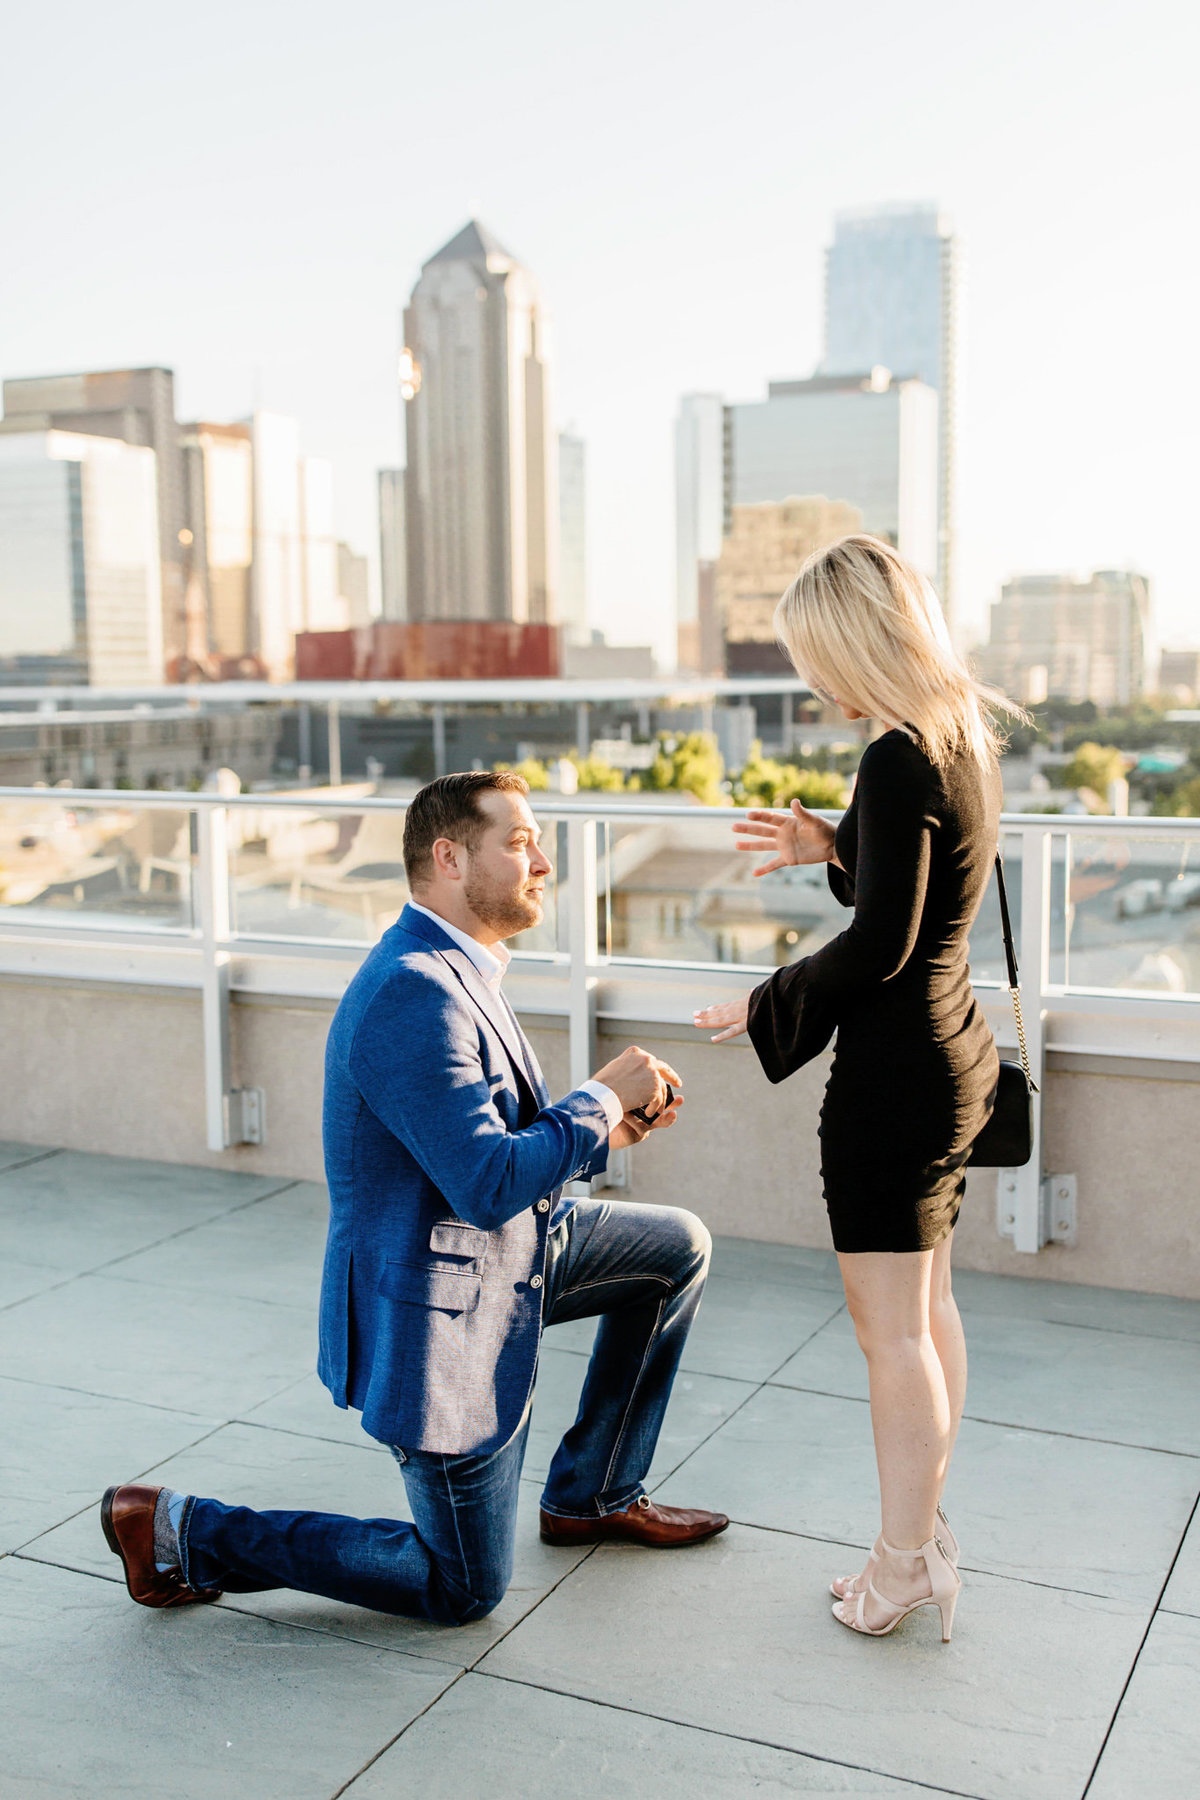 Eric & Megan - Downtown Dallas Rooftop Proposal & Engagement Session-29